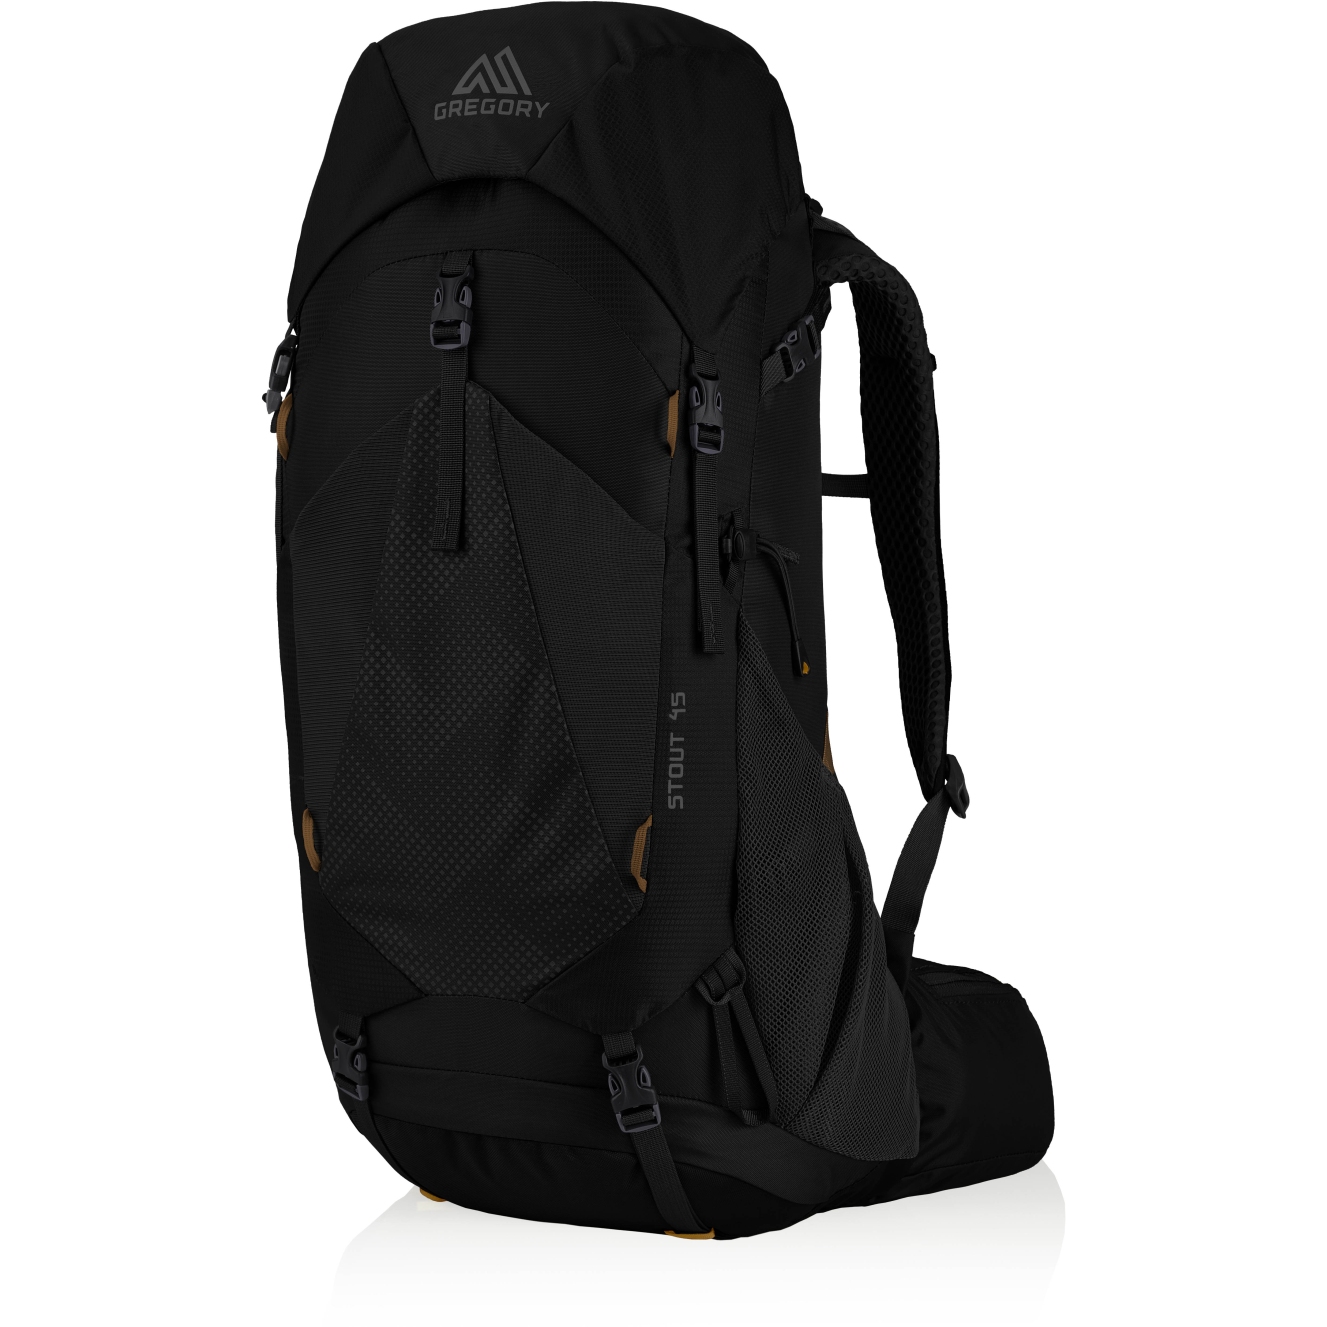 Picture of Gregory Stout 45 Backpack - Buckhorn Black